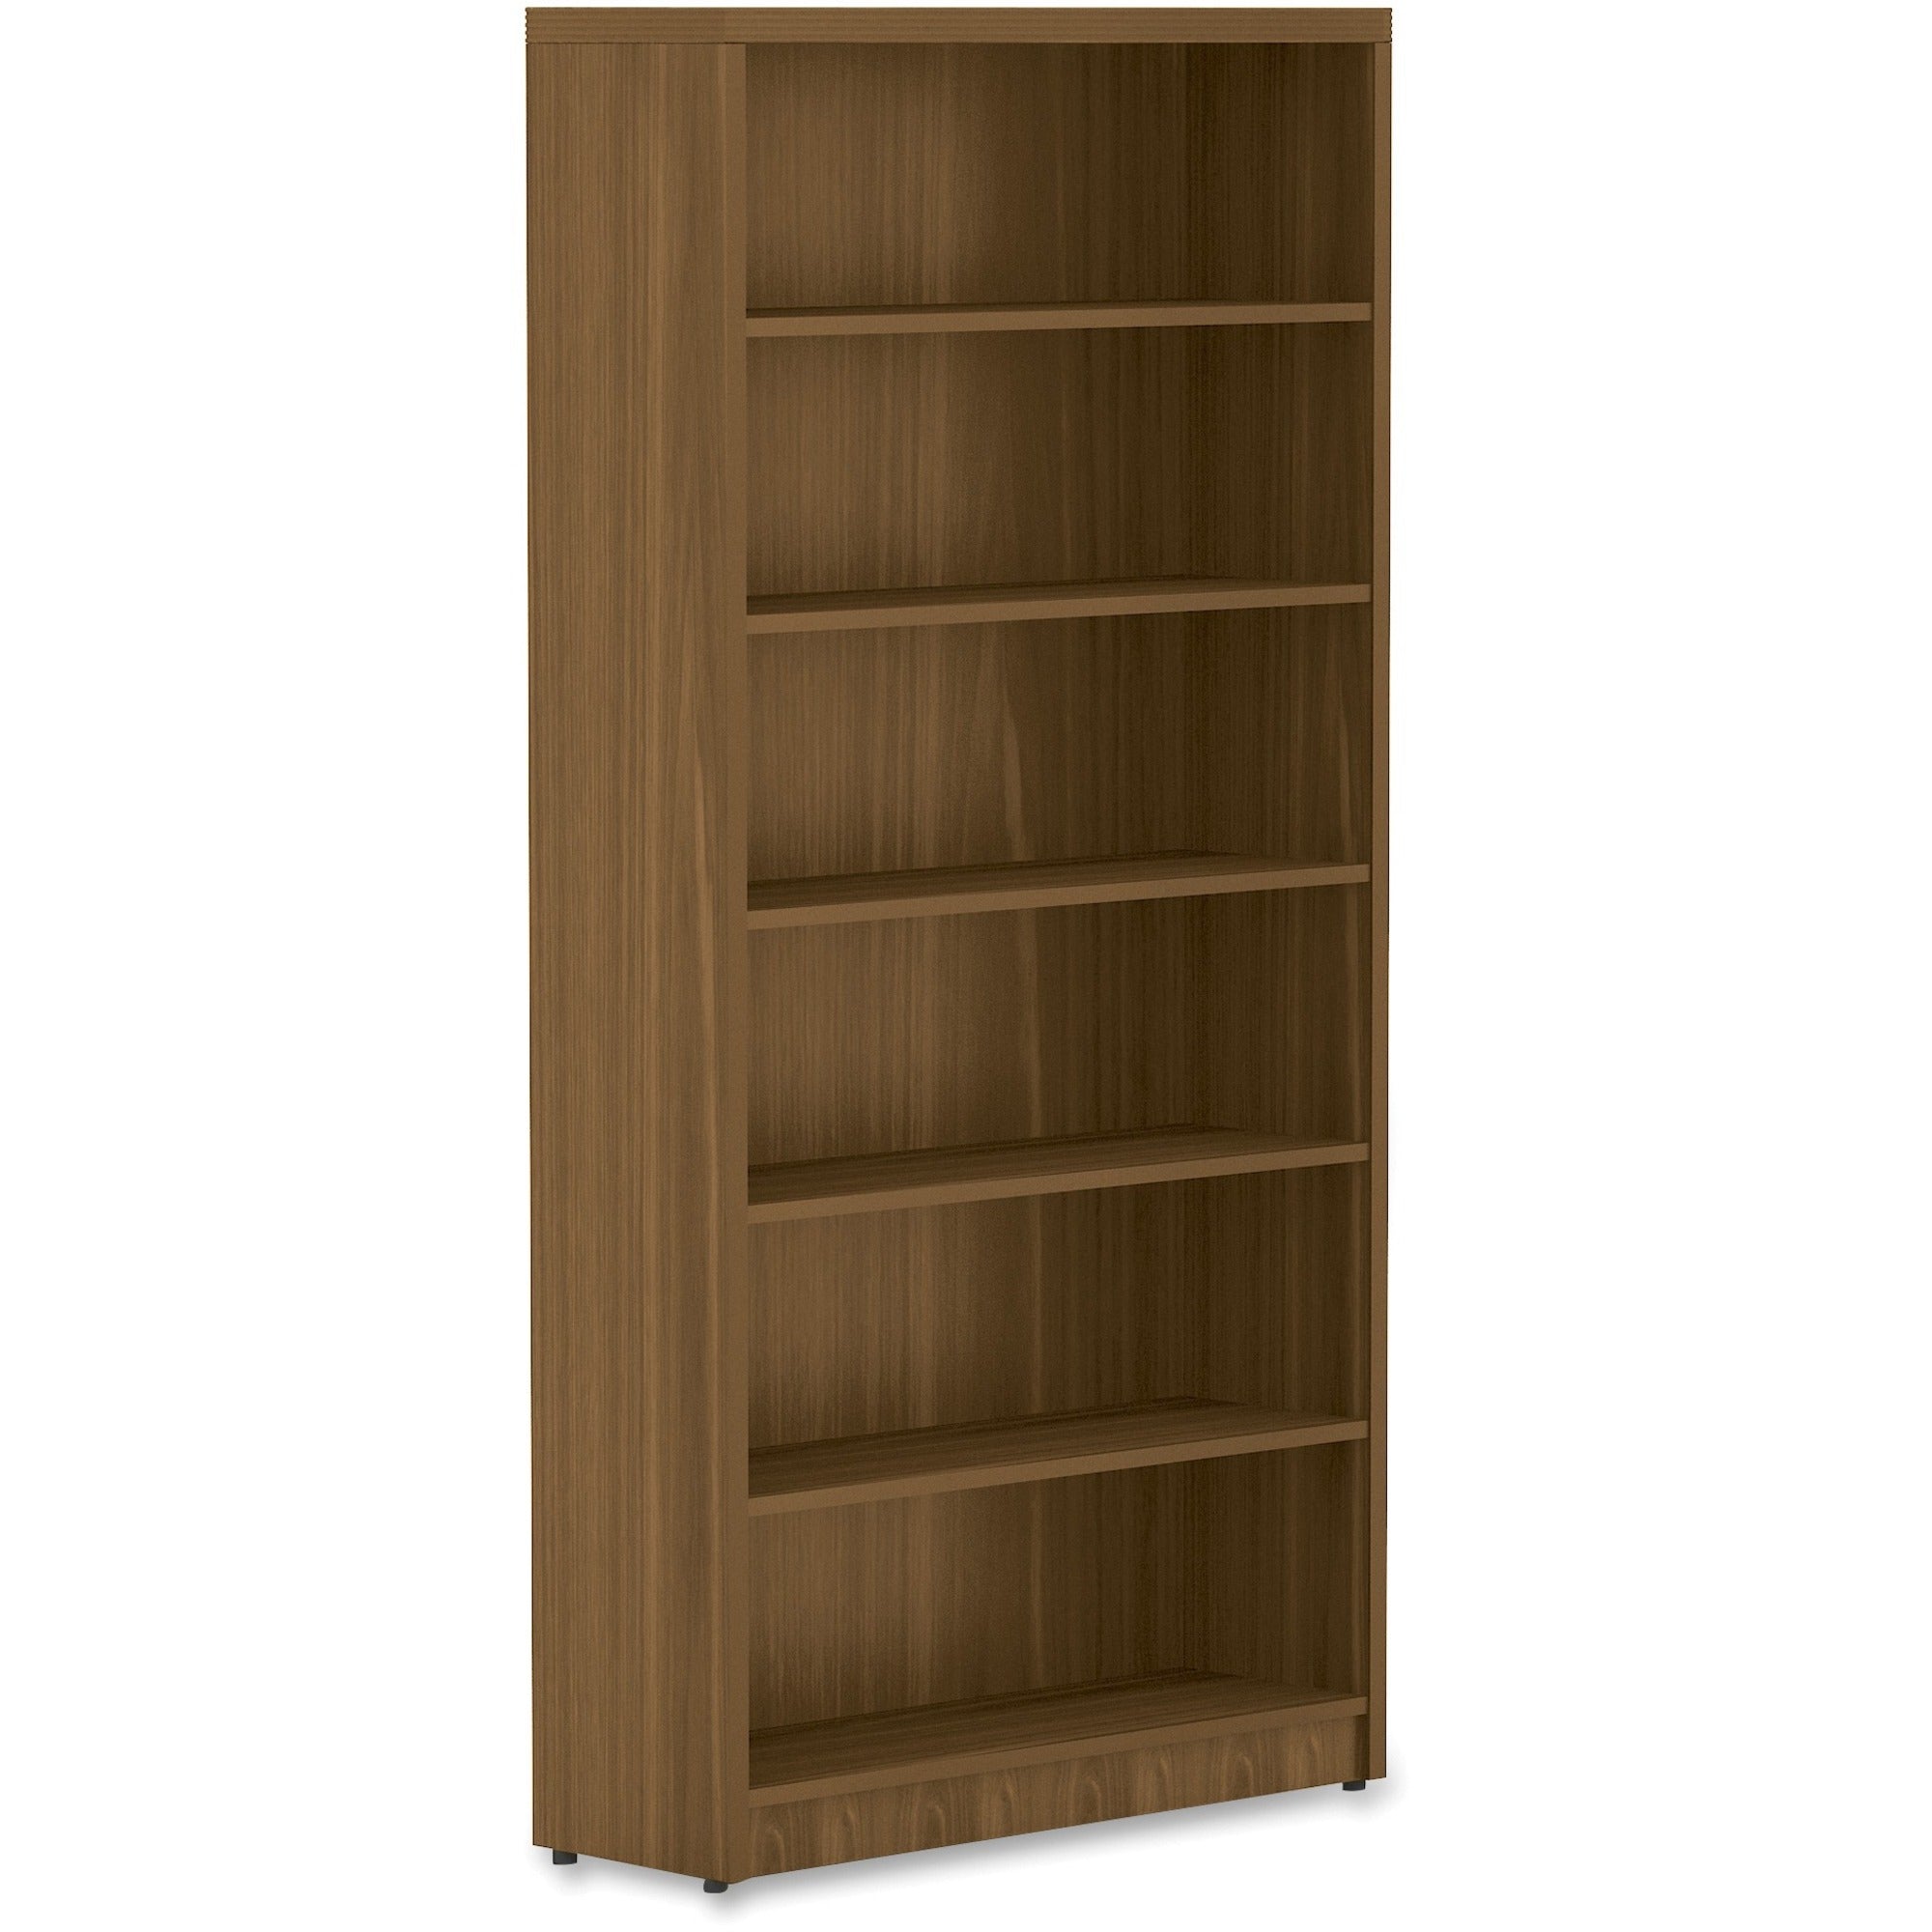 Lorell Chateau Series Bookshelf - 1.5" Top, 36" x 11.6"72.5" Bookshelf - 6 Shelve(s) - Reeded Edge - Material: P2 Particleboard - Finish: Walnut, Laminate - Durable, Sturdy - For Office, Book - 